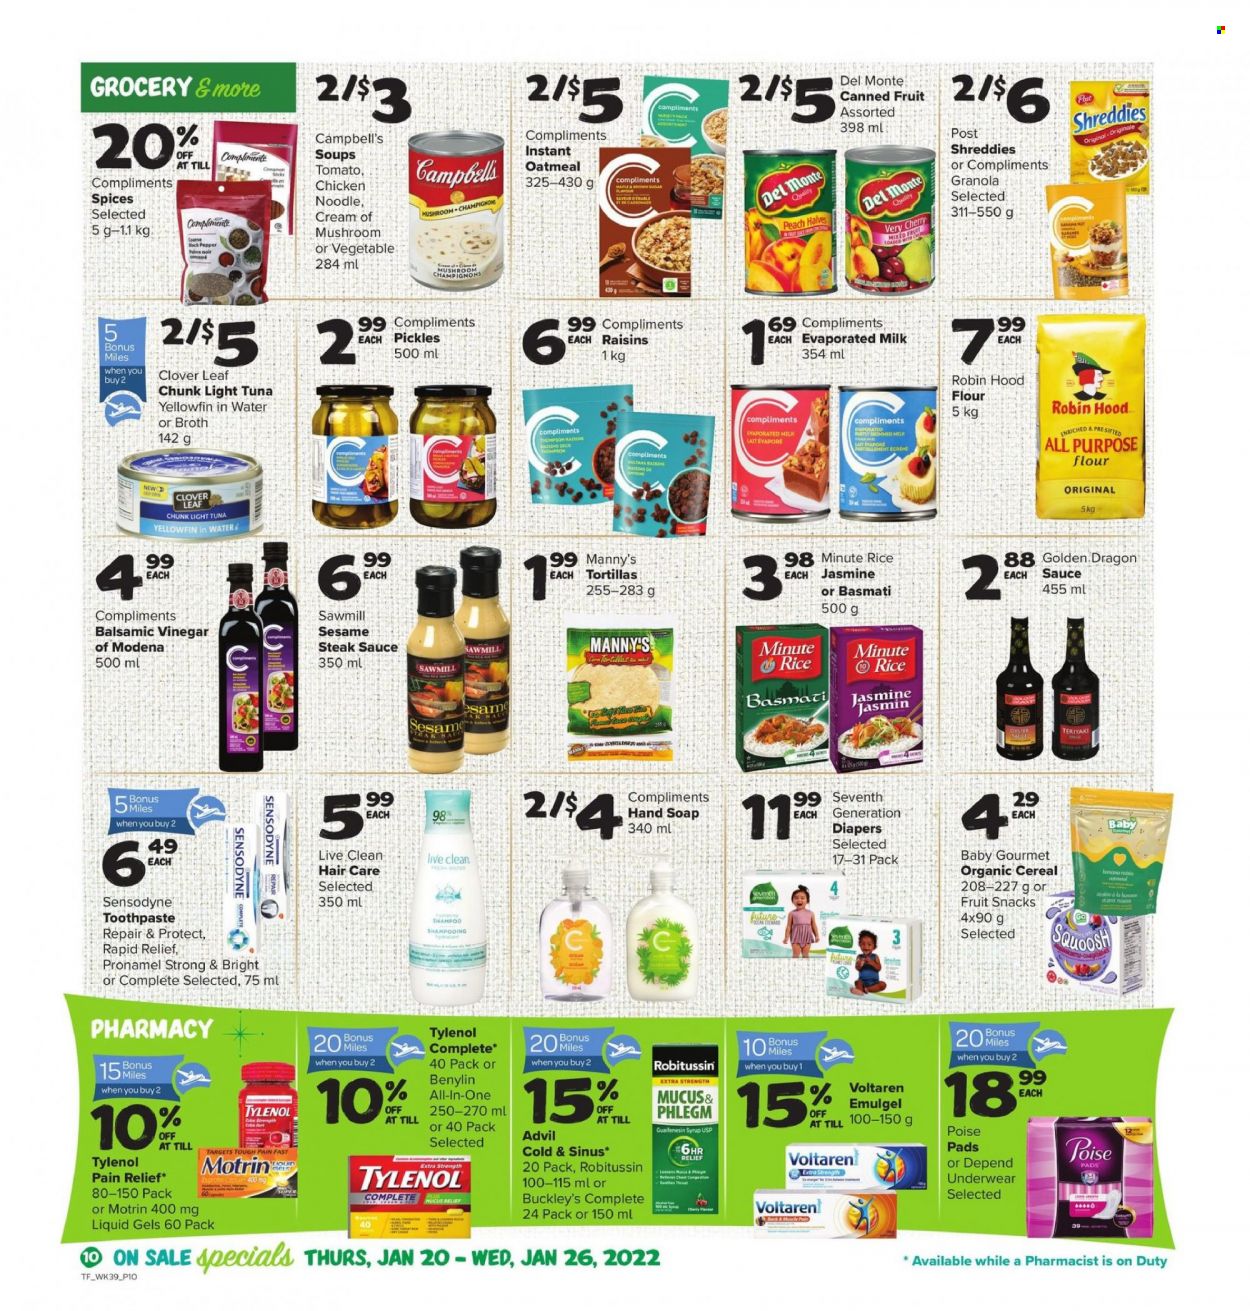 thumbnail - Thrifty Foods Flyer - January 20, 2022 - January 26, 2022 - Sales products - mushrooms, tortillas, cherries, tuna, Campbell's, noodles, Clover, evaporated milk, fruit snack, broth, pickles, light tuna, canned fruit, cereals, basmati rice, rice, steak sauce, balsamic vinegar, vinegar, syrup, dried fruit, nappies, hand soap, soap, toothpaste, pain relief, Tylenol, Advil Rapid, Benylin, Motrin, granola, raisins, Robitussin, shampoo, steak, Sensodyne. Page 10.